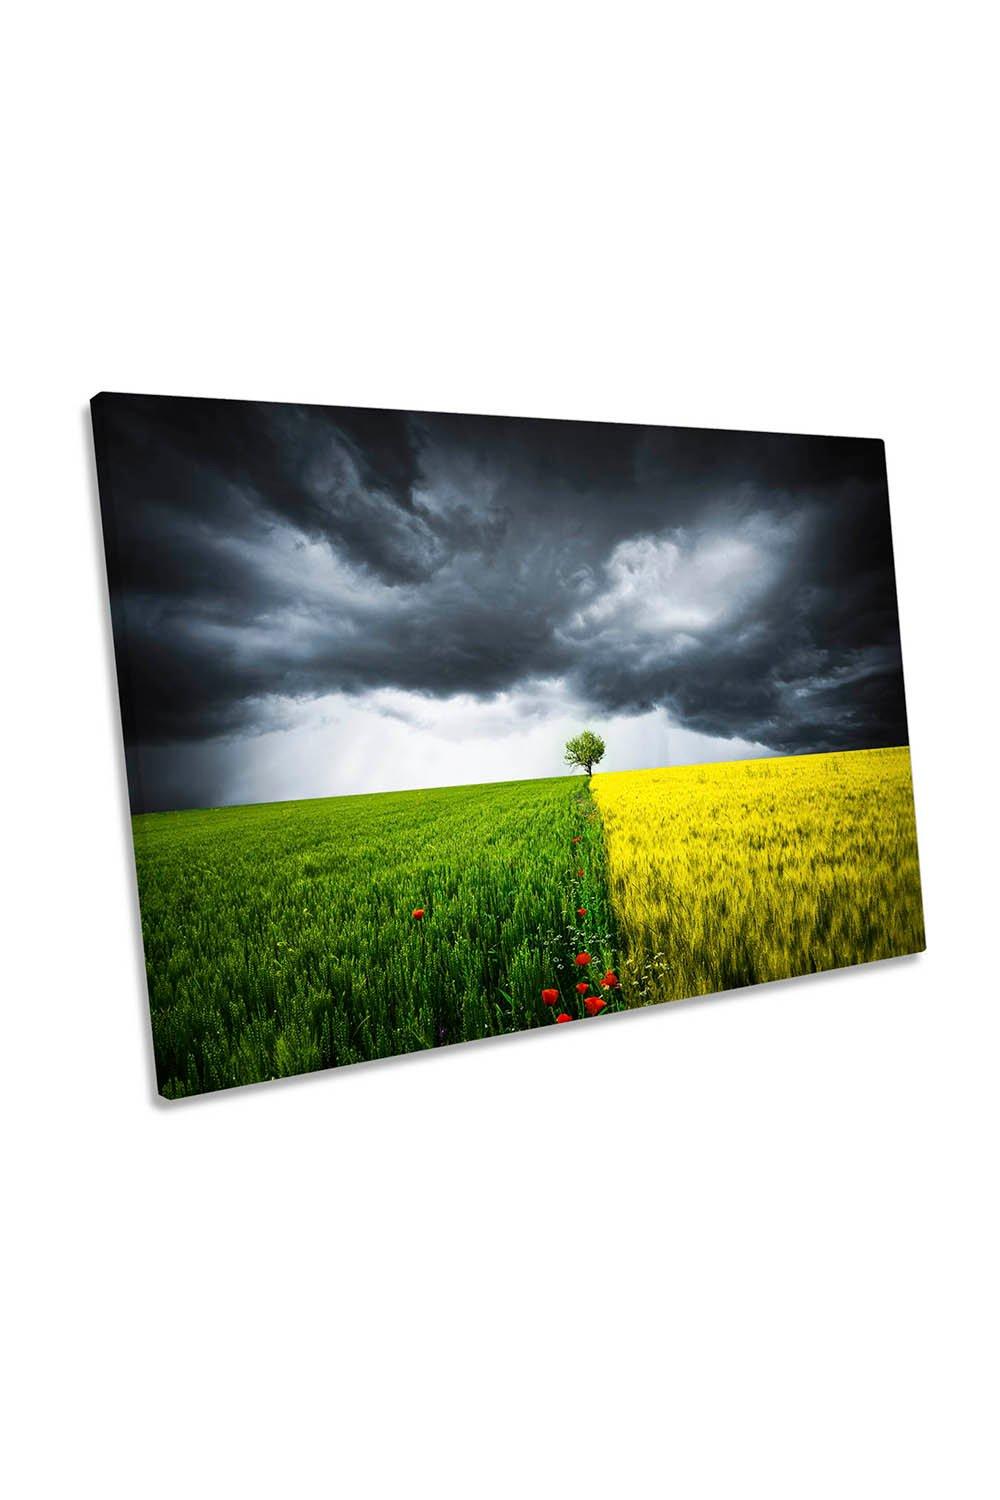 Stormy Lonely Tree Landscape Seasons Canvas Wall Art Picture Print